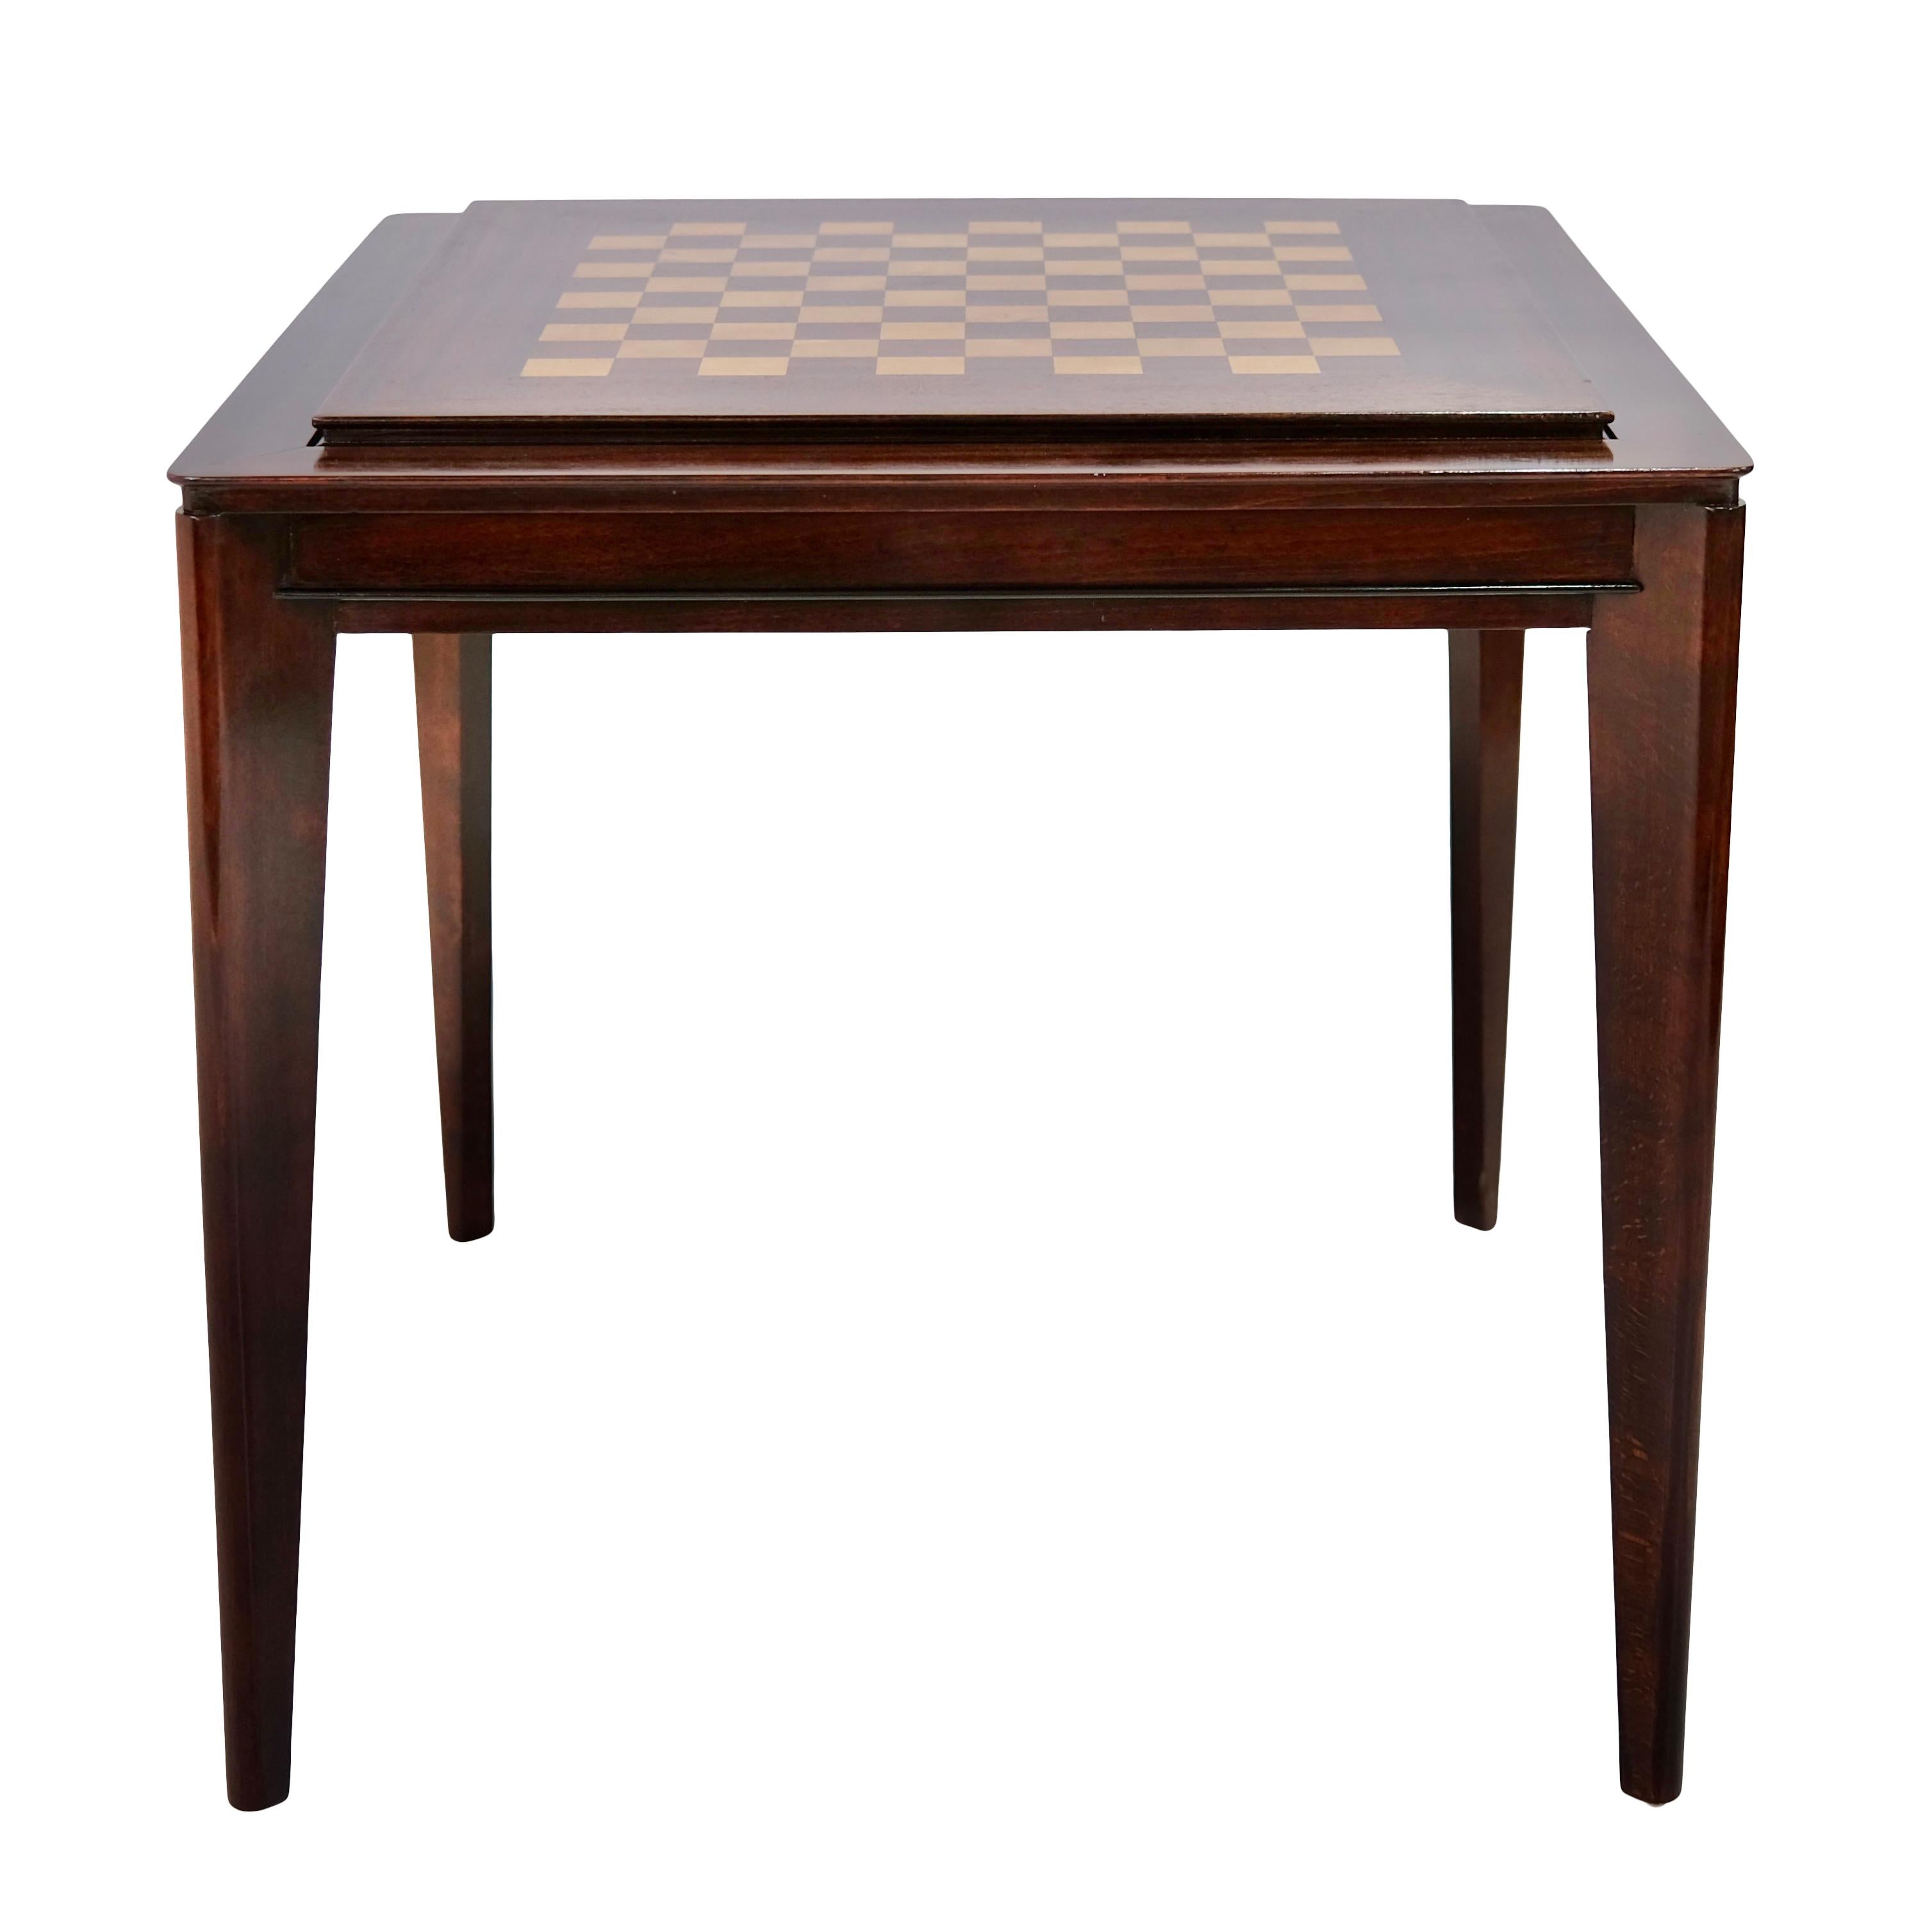 Ready for the next poker night with your friends? 
Or a thrilling game of chess with your partner? 
This gambling table will brighten up many a long game night for you. 

Game table, inside with chessboard 
mahogany and maple 
shellac, hand